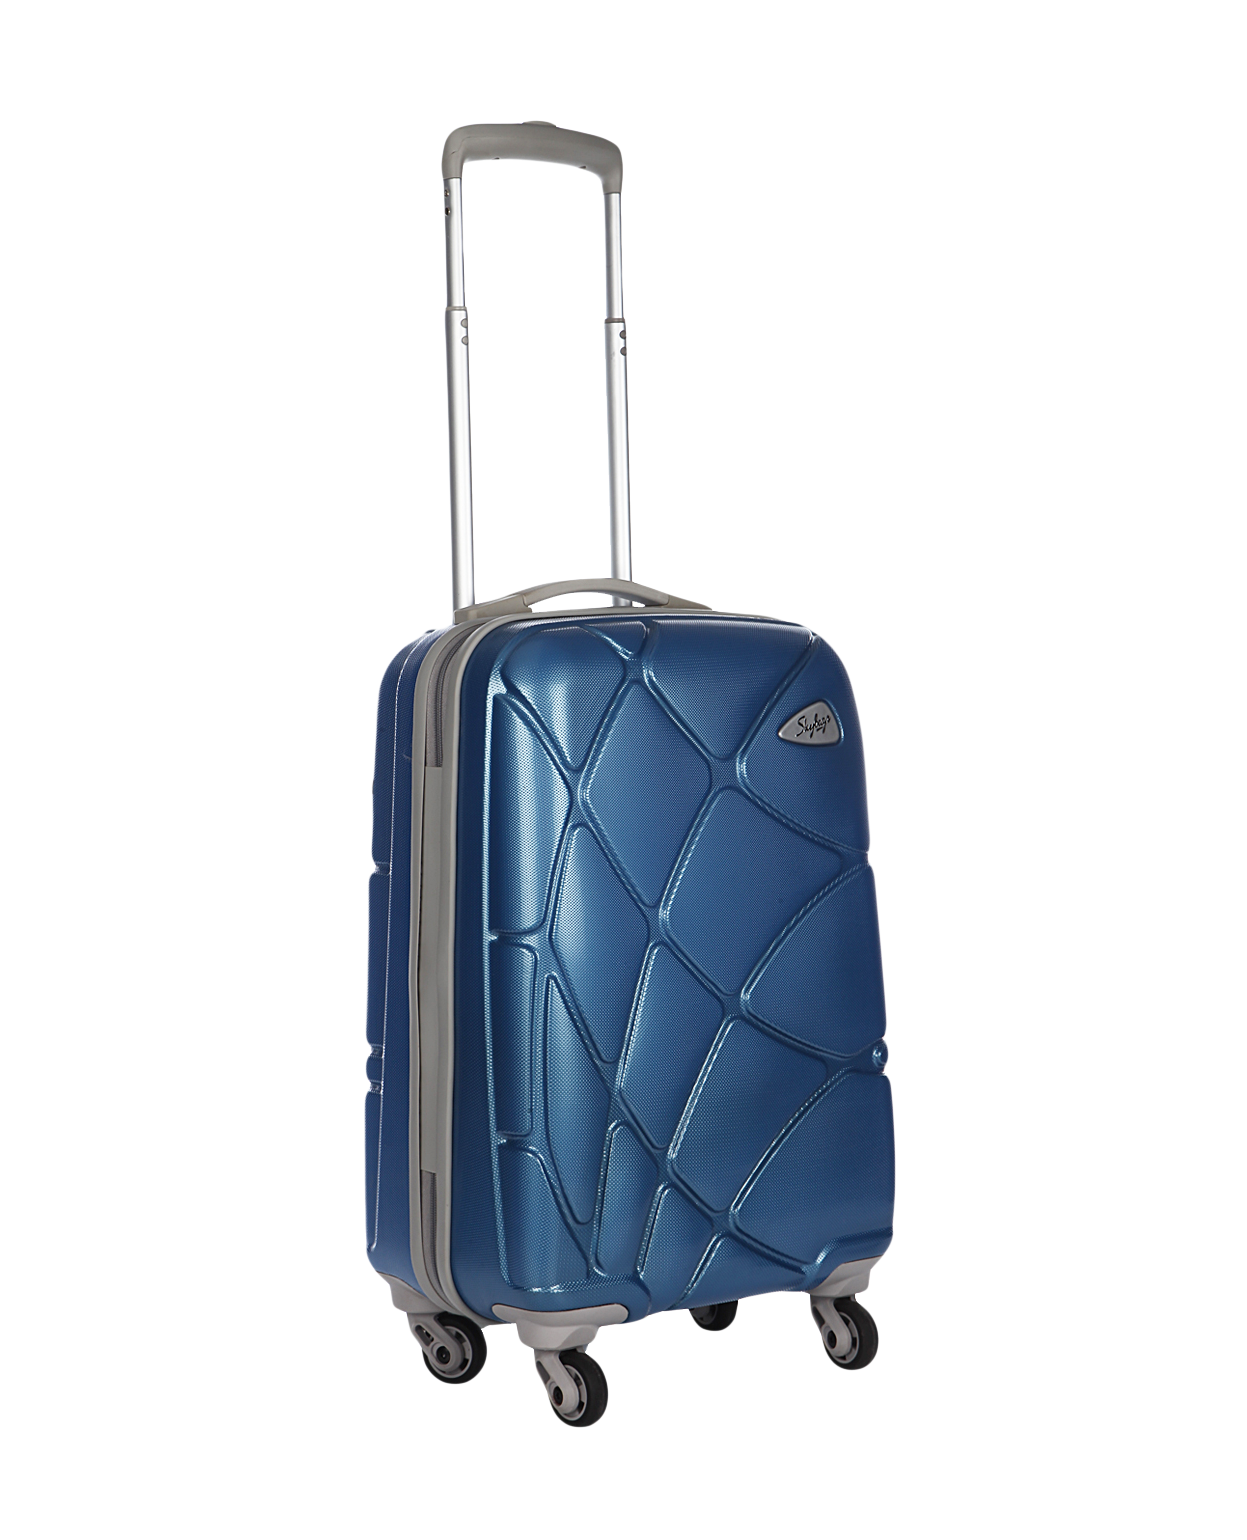 Strolley Suitcase PNG HD Images